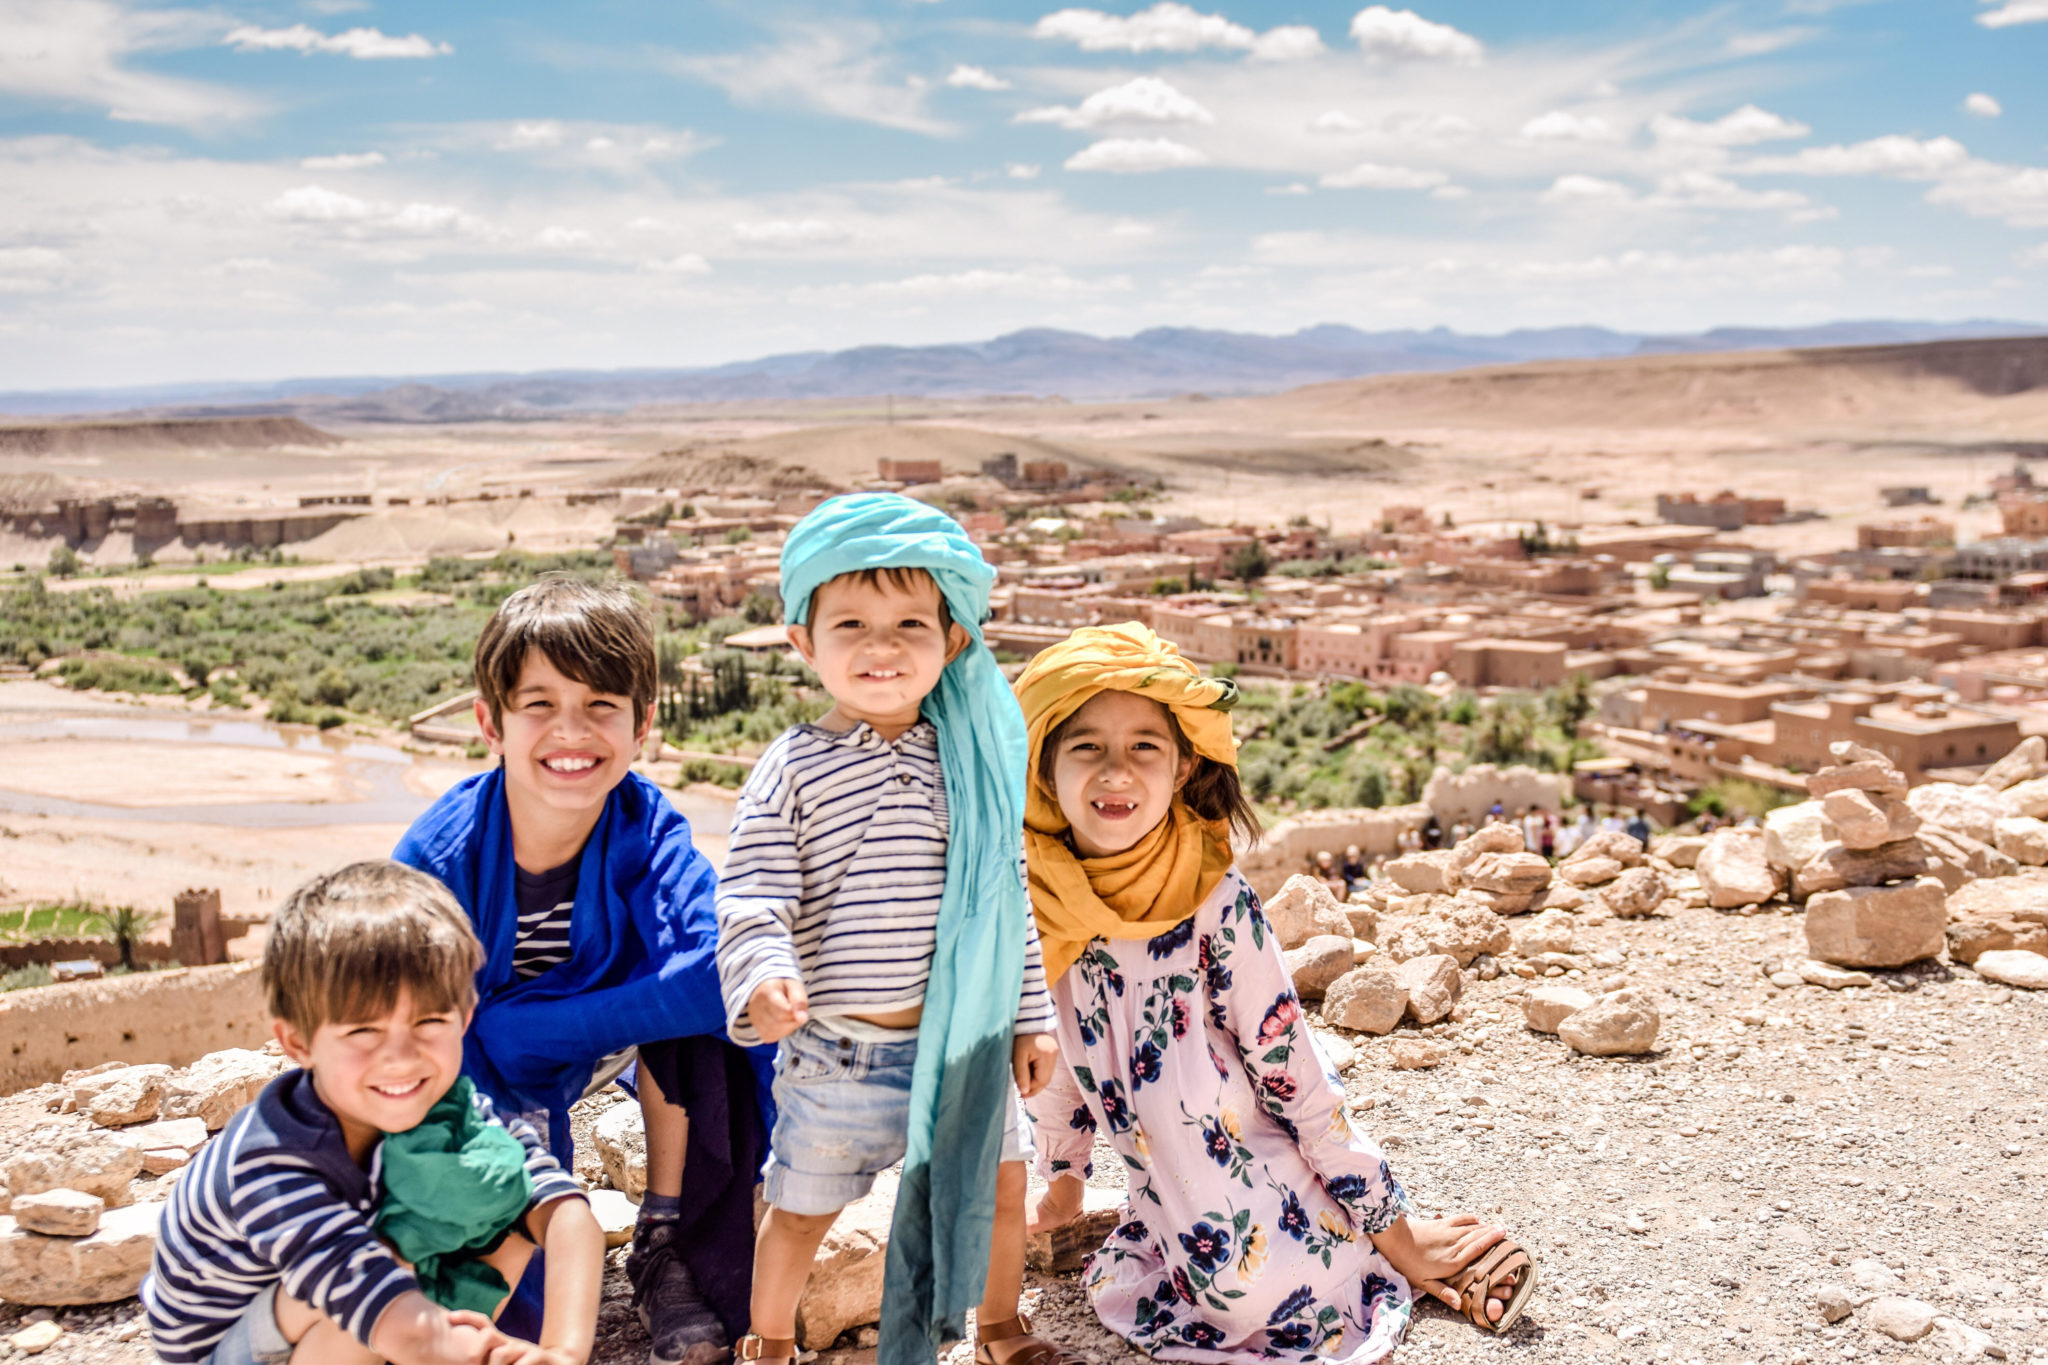 morocco unesco site travel with kids| 7 Reasons to Take a Morocco Family Vacation by popular Northern California travel blog, Local Passport Family: image of a 4 kids sitting outside with a Moroccan city behind them.